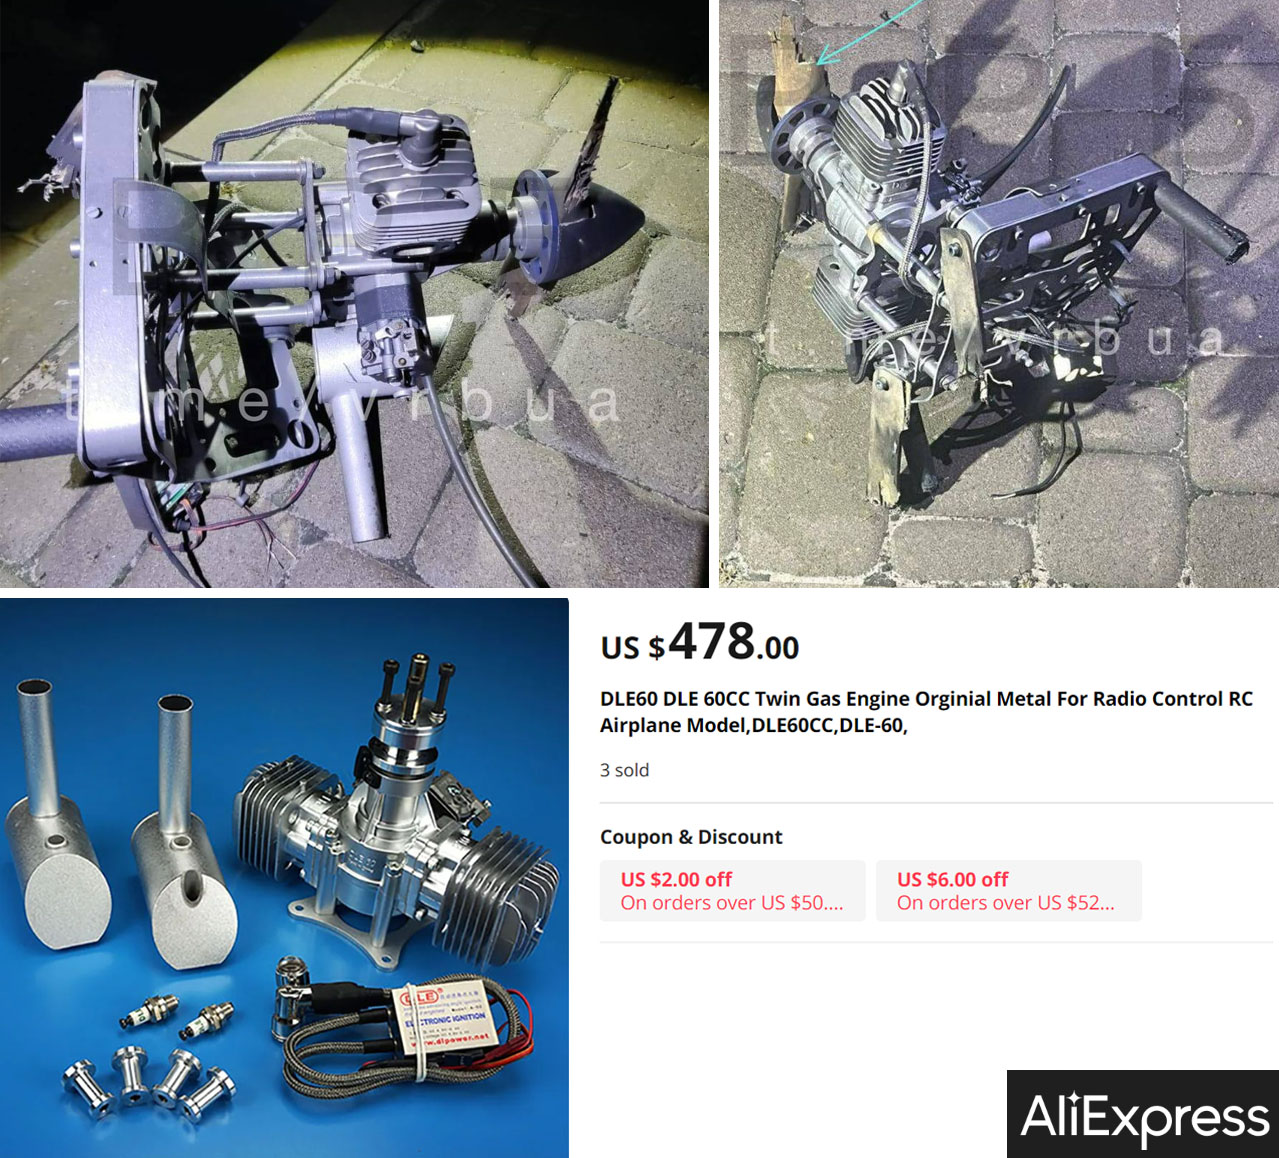 DLE-60 motor engine listed for safe on AliExpress